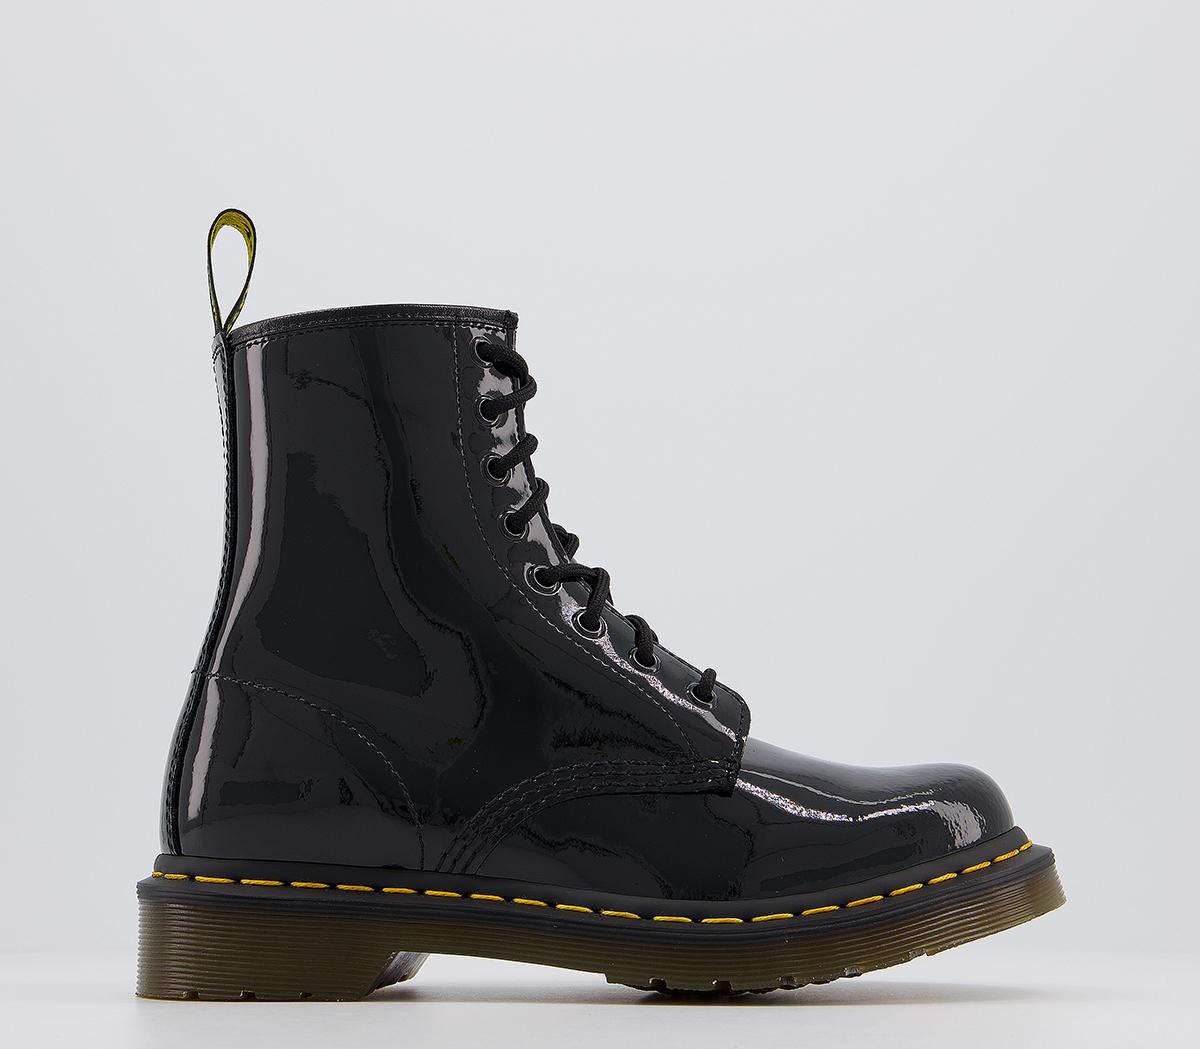 Dr. Martens 8 Eyelet Lace Up Boots Black Patent - Ankle Boots